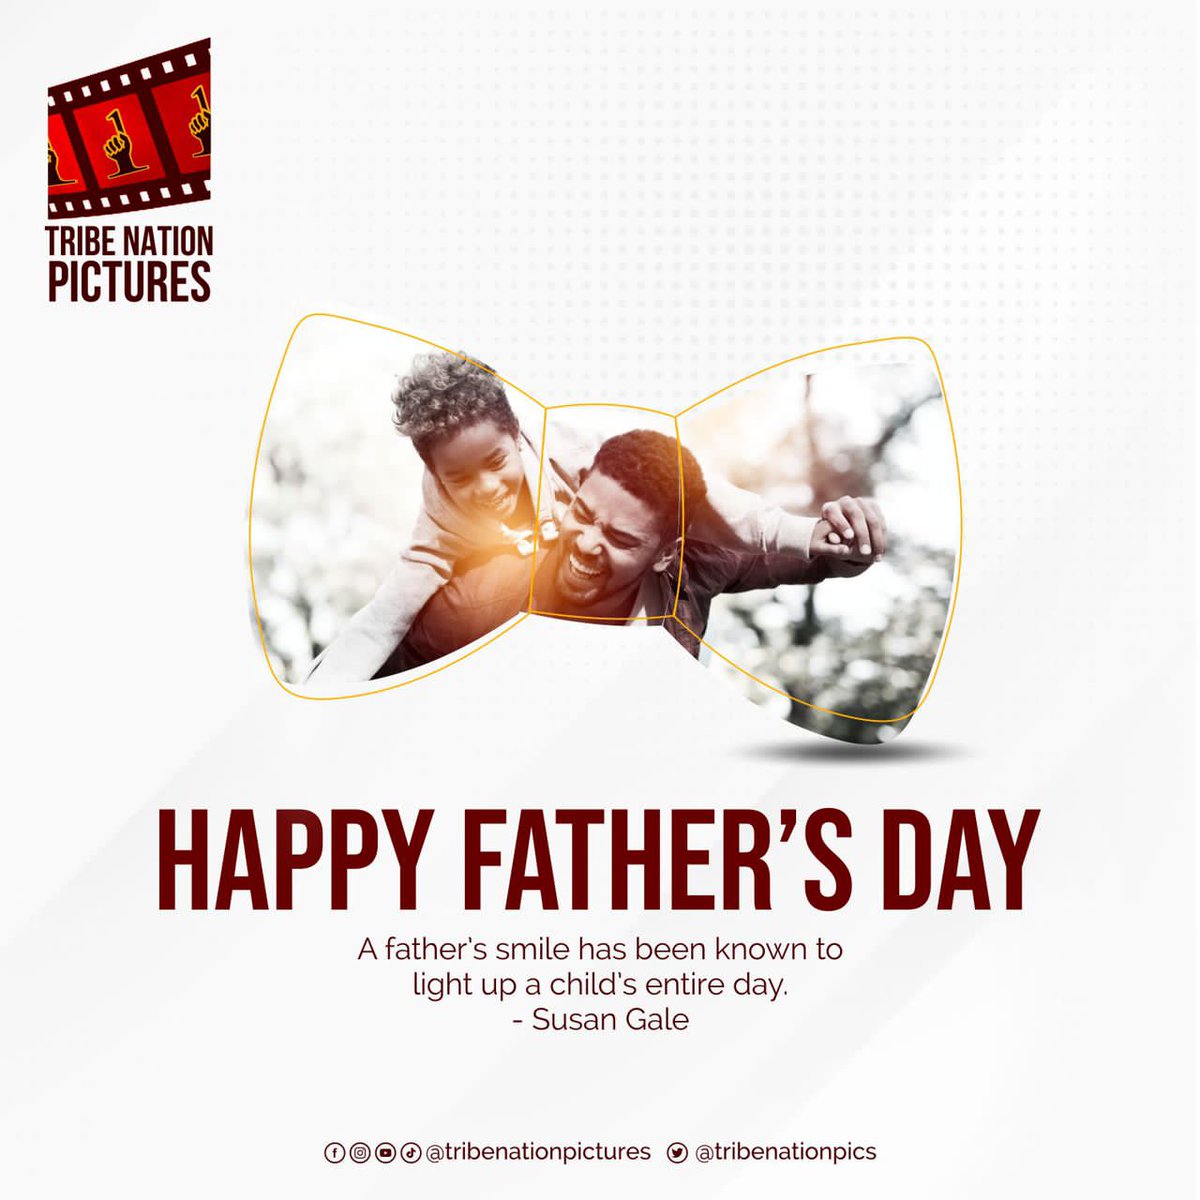 Happy Father's Day to all the incredible dads who inspire us on and off the screen. We love you! ✨️🎊

#FathersDay #TribeNation #FilmProduction #WeAreCulture #TribeNationPictures #FamilyTime #Wholesome #FamilyFriendly